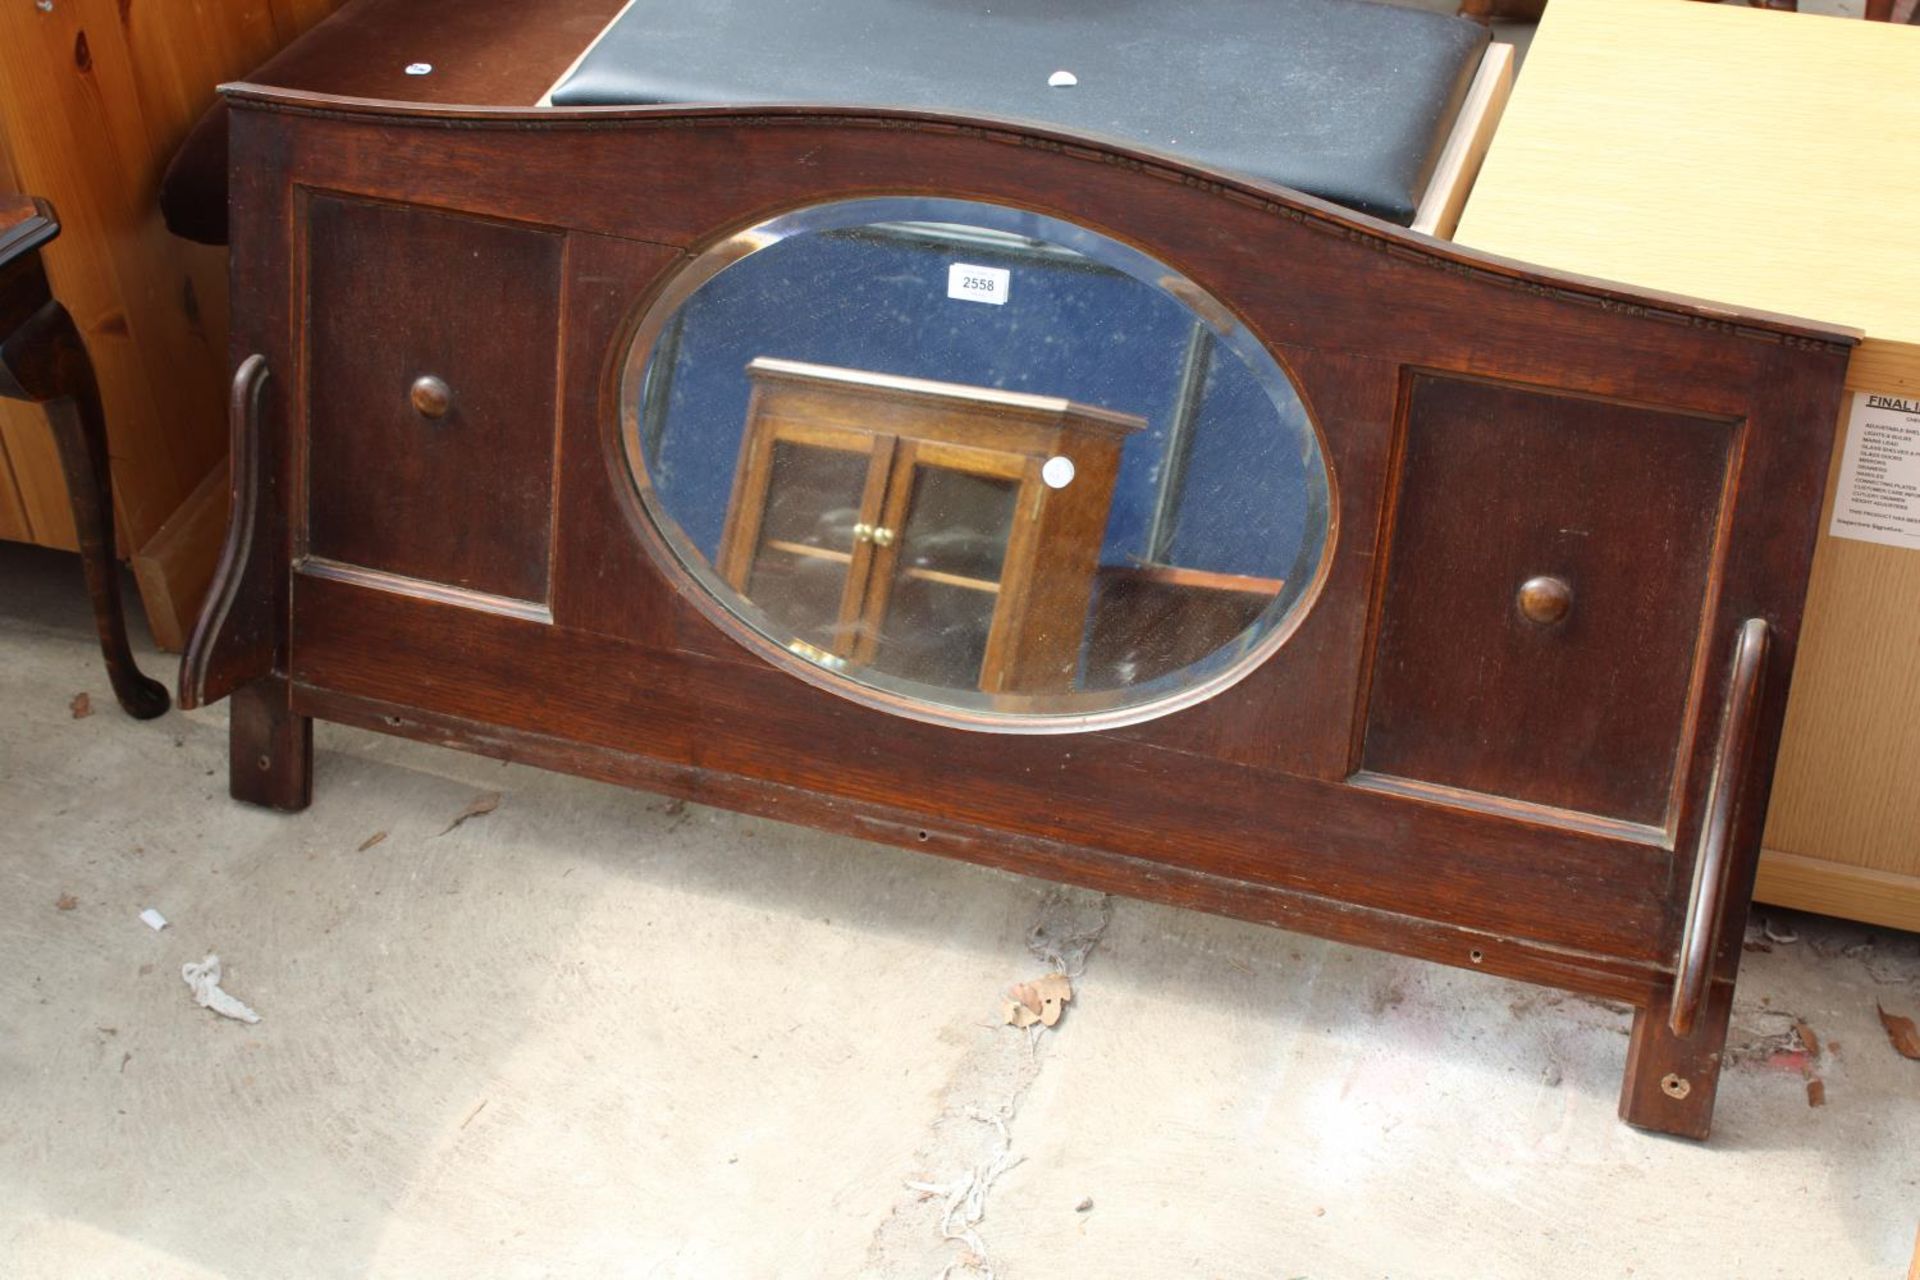 A MODERN COFFEE TABLE AND SIDEBOARD MIRROR BACK - Image 2 of 4